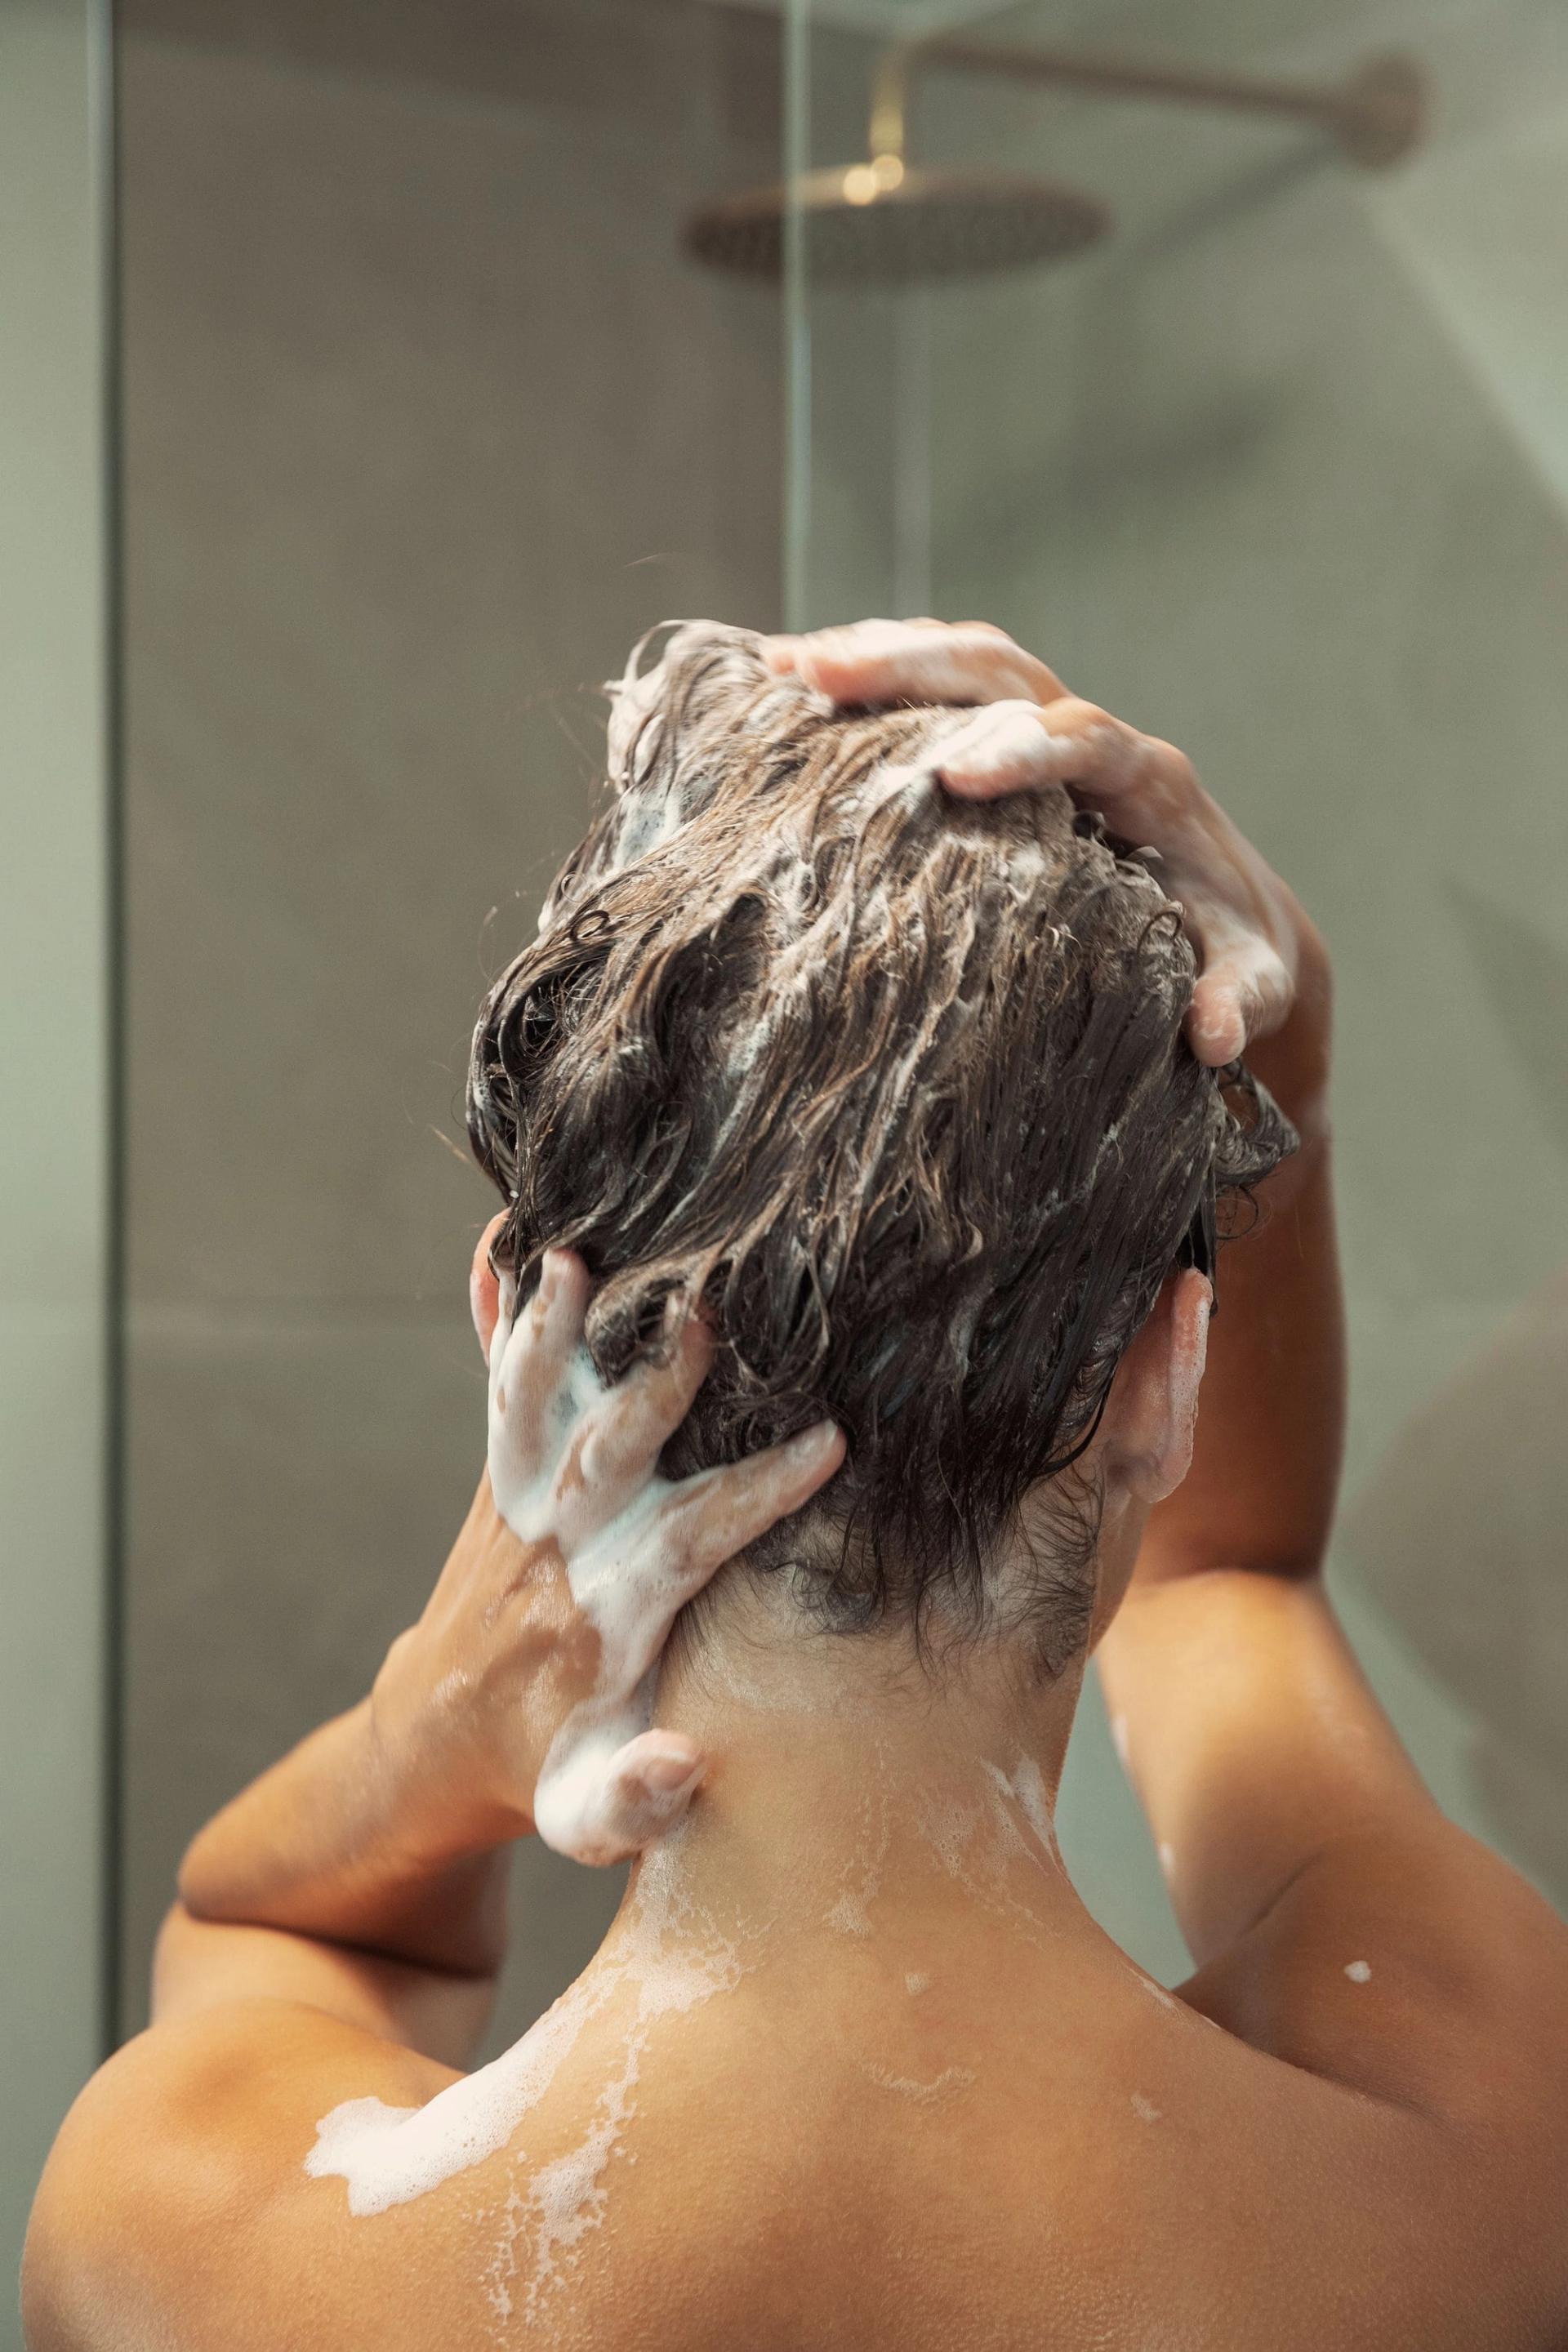 Back of Woman's head washing with shampoo in shower